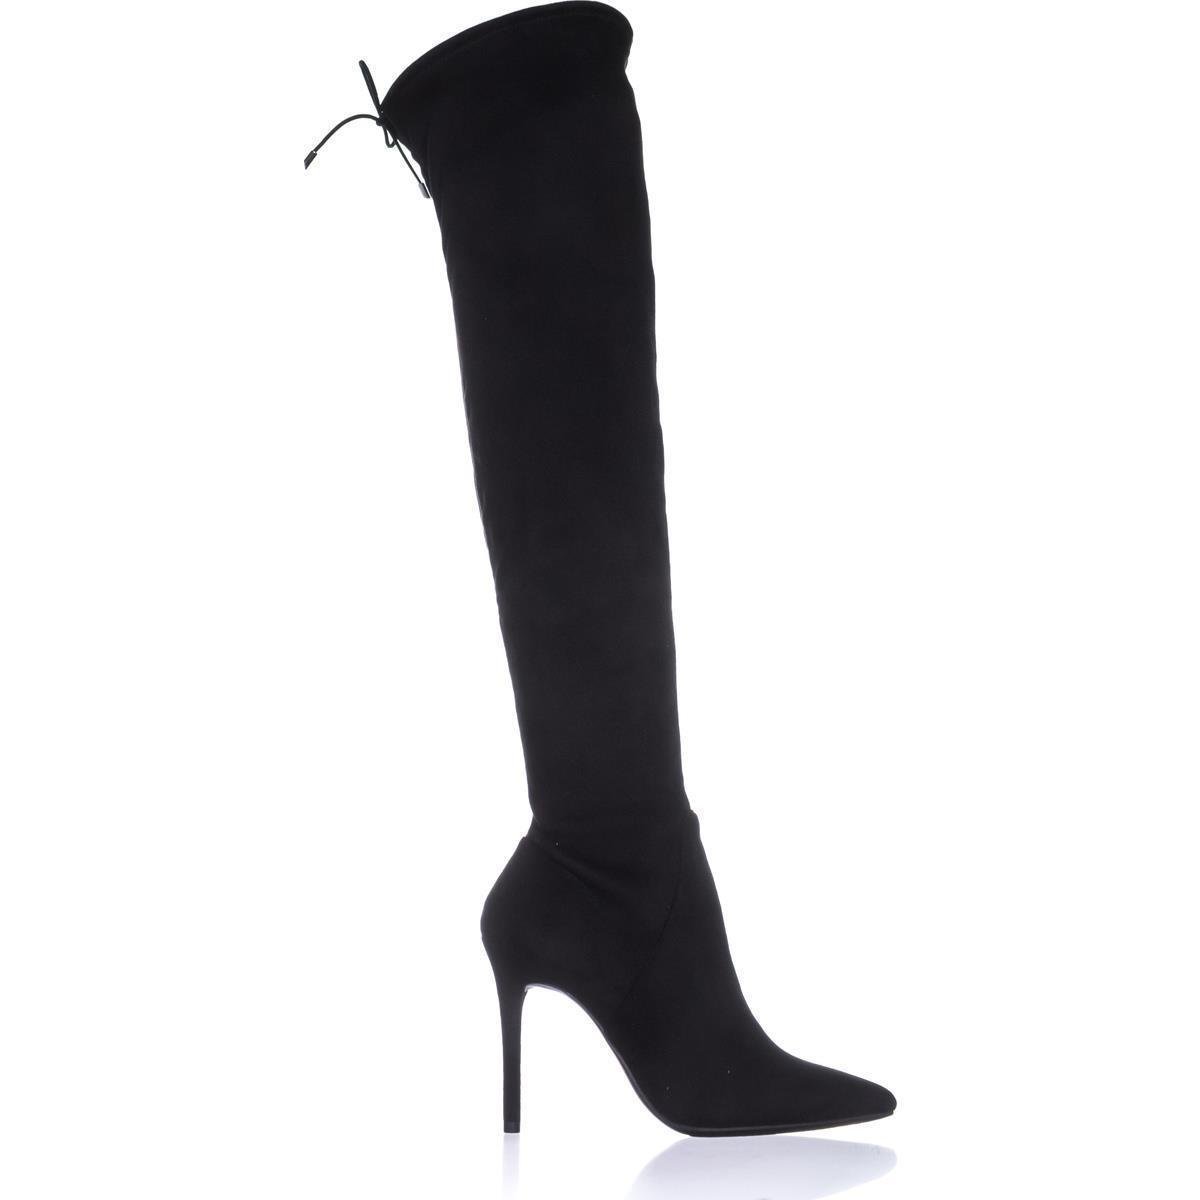 Jessica Simpson Womens Lessy Pointed Toe Over Knee Fashion Boots | eBay